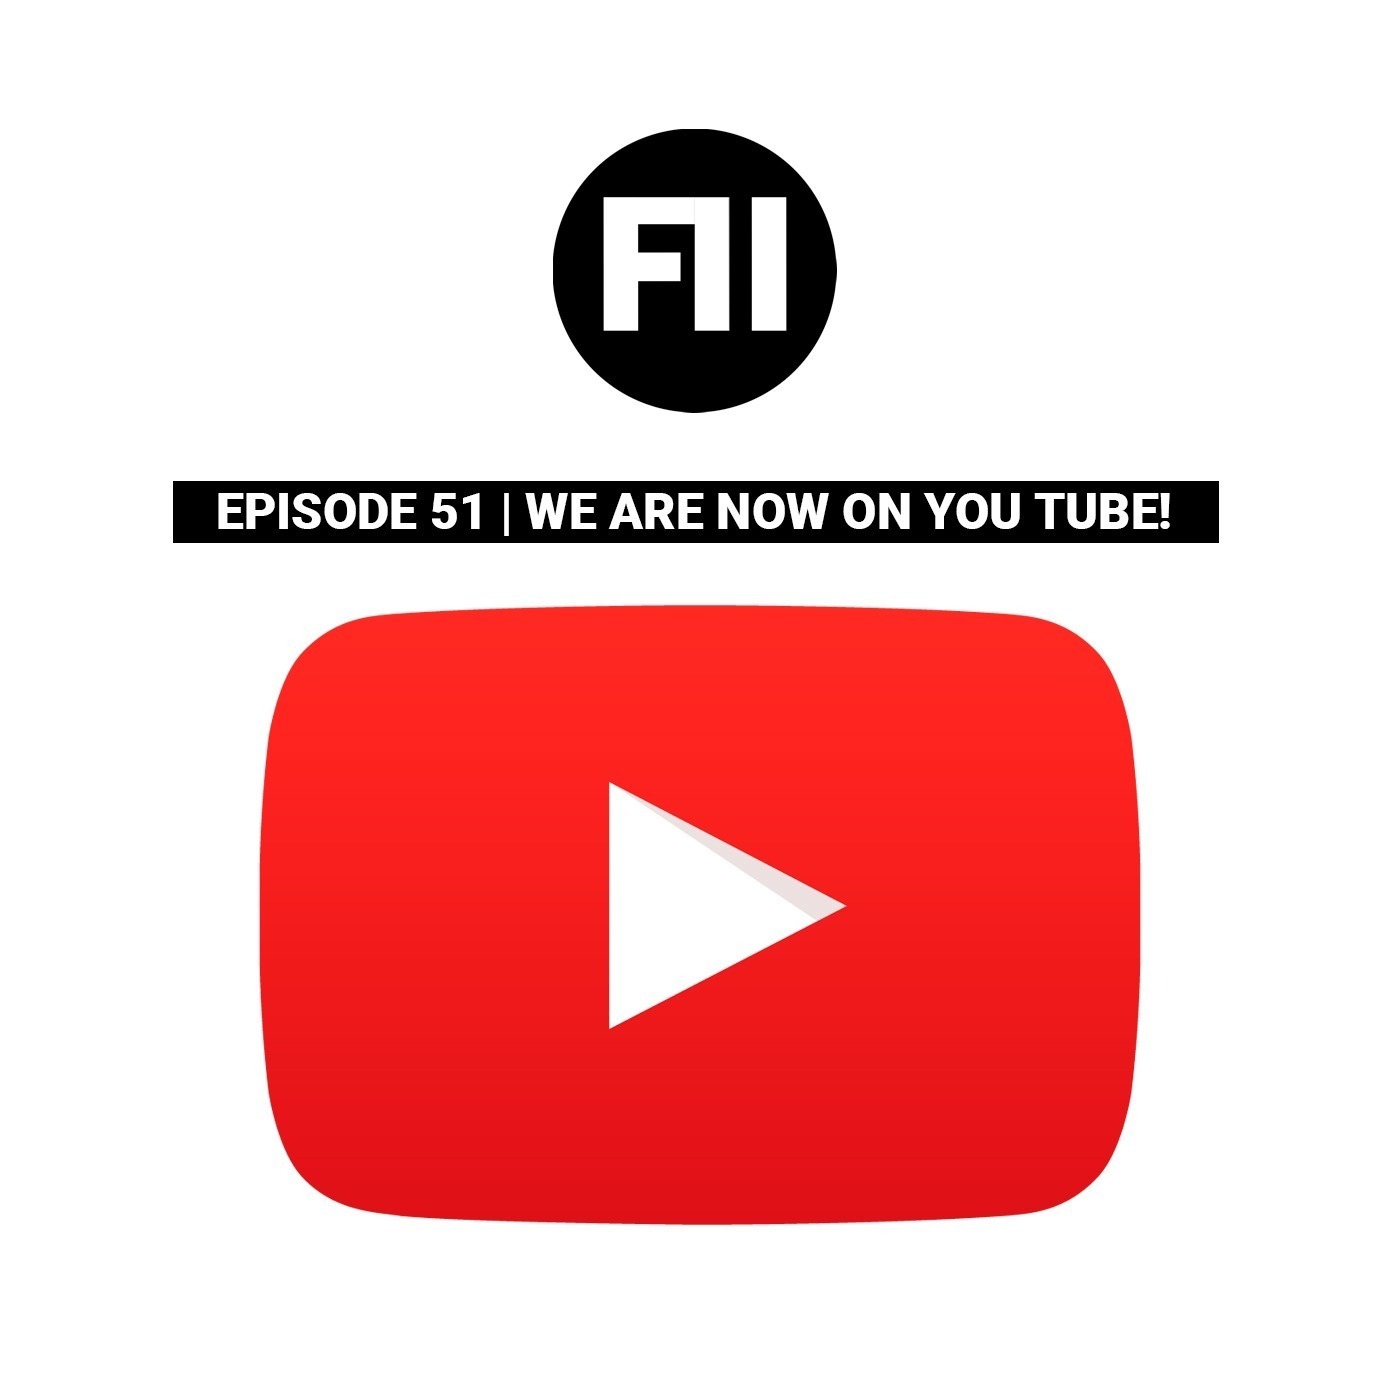 We Are On You Tube Now! (S02E01)